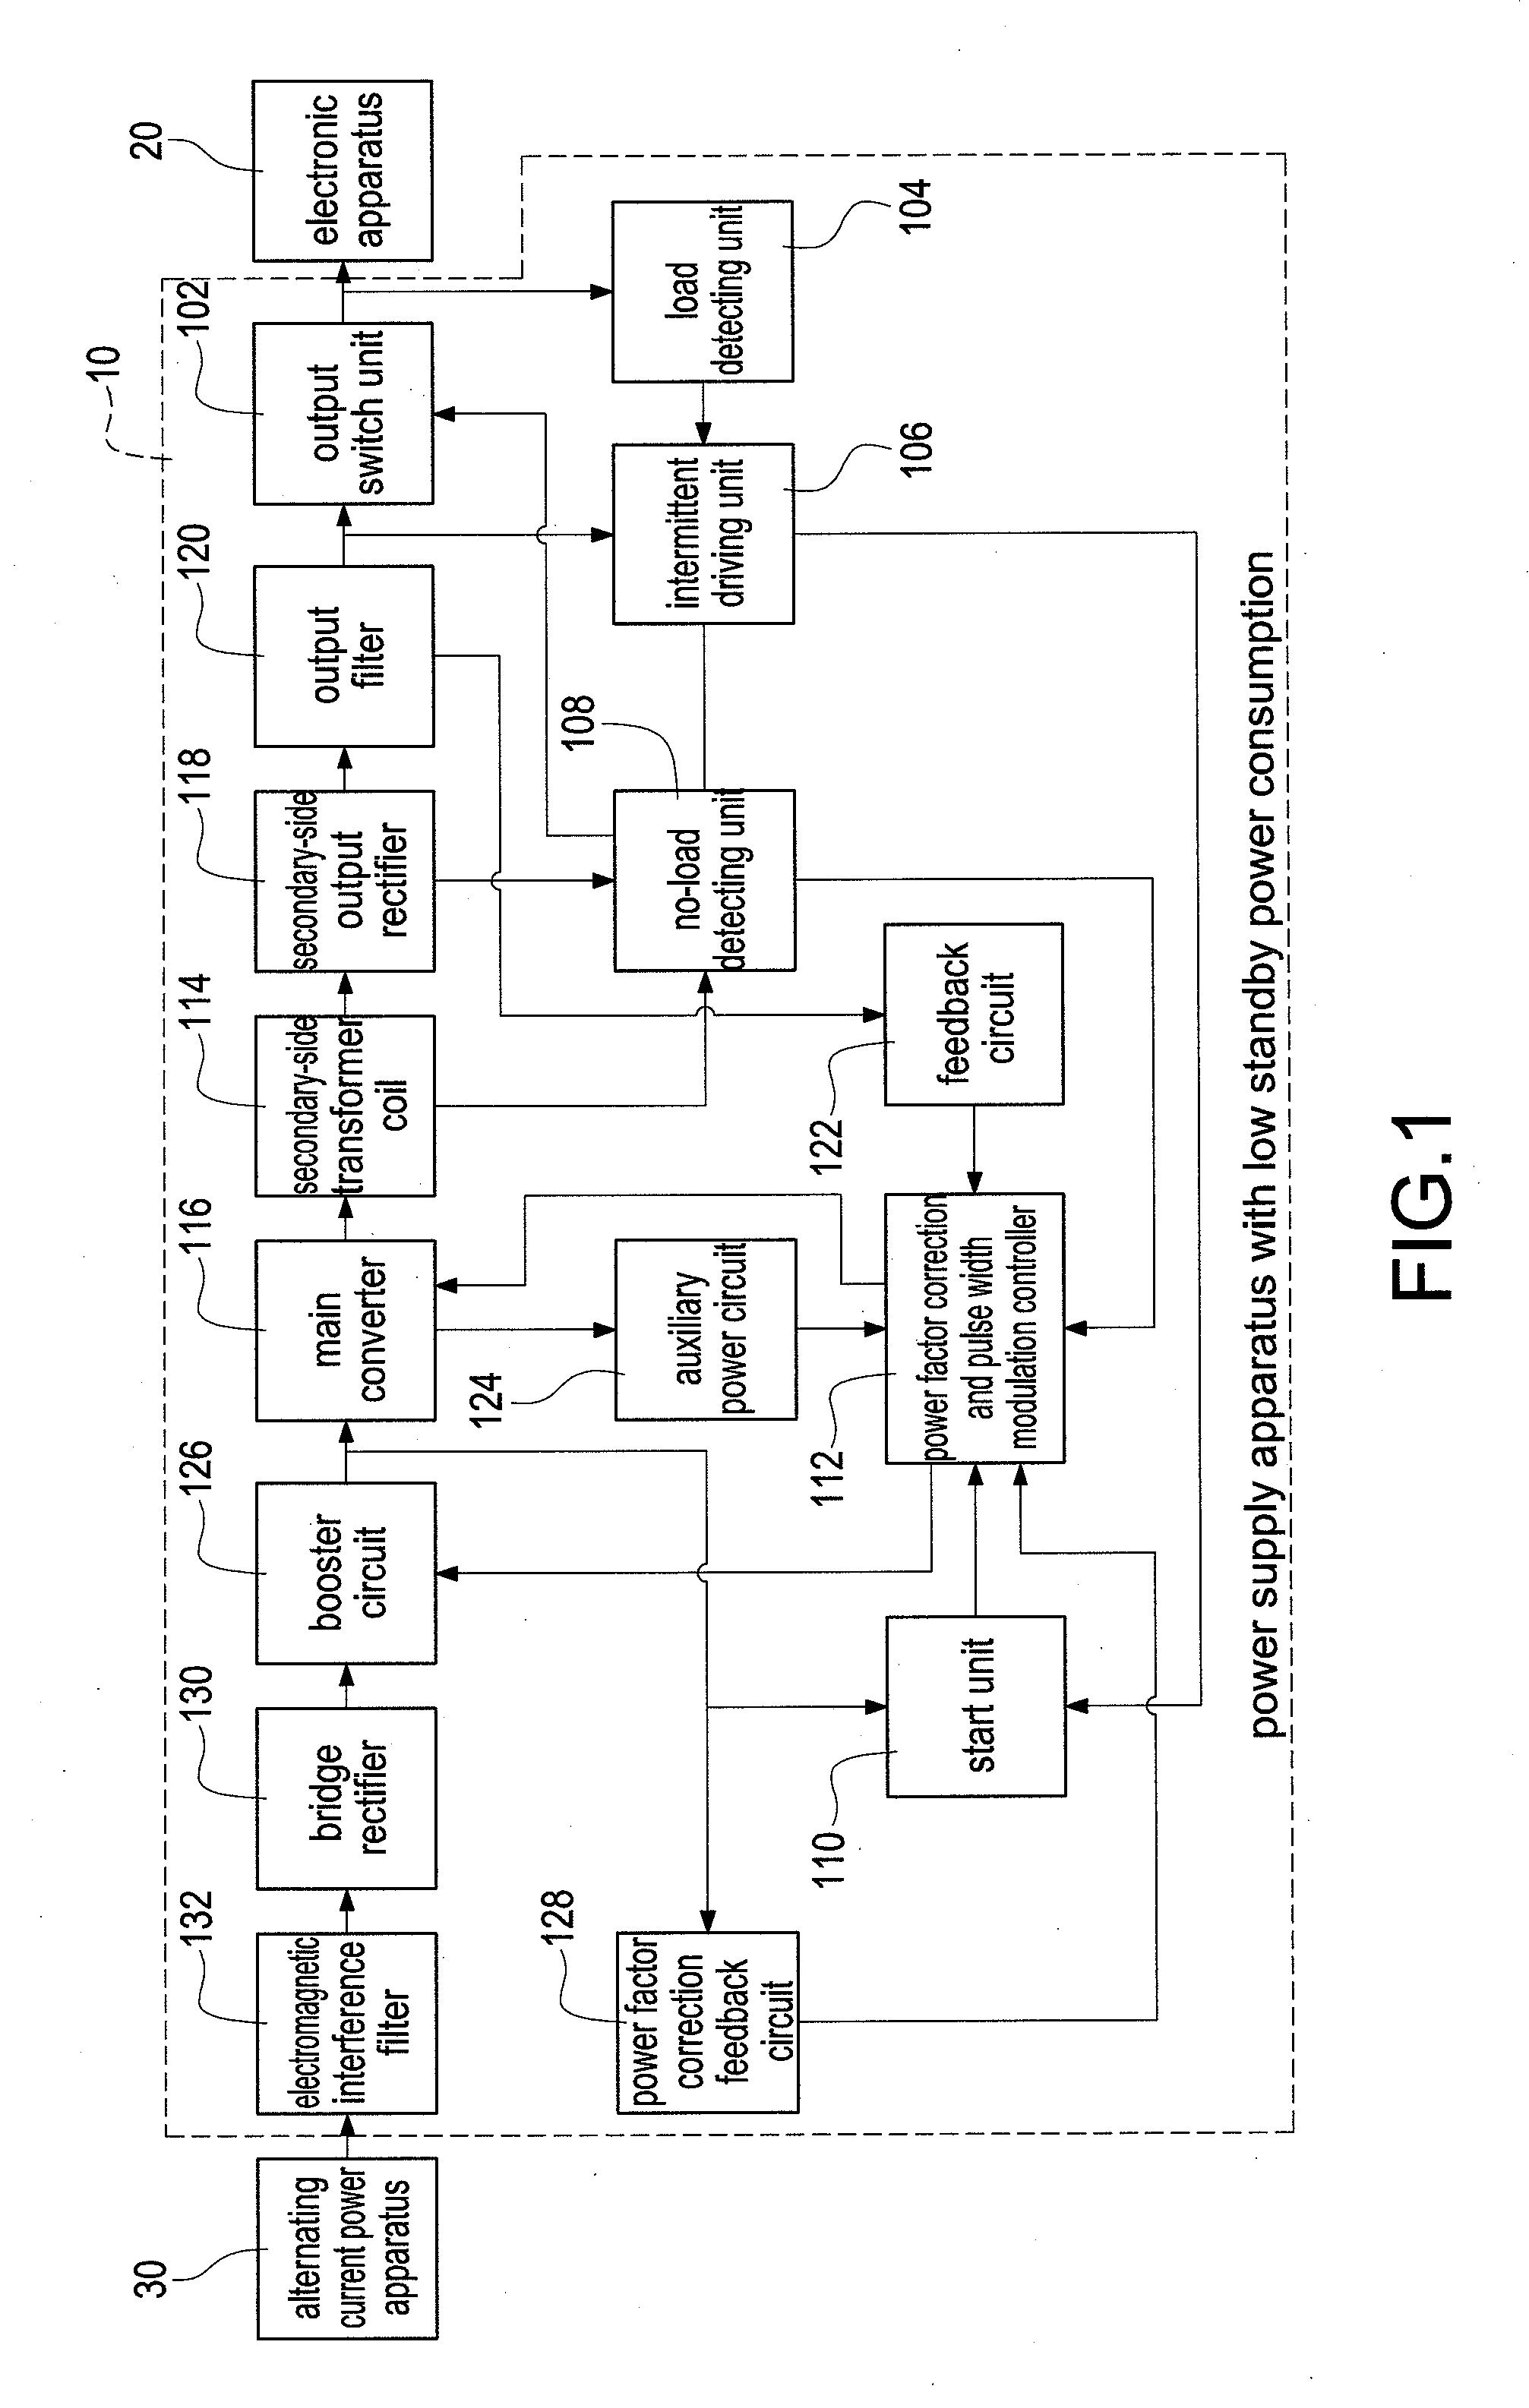 Power supply apparatus with low standby power consumption